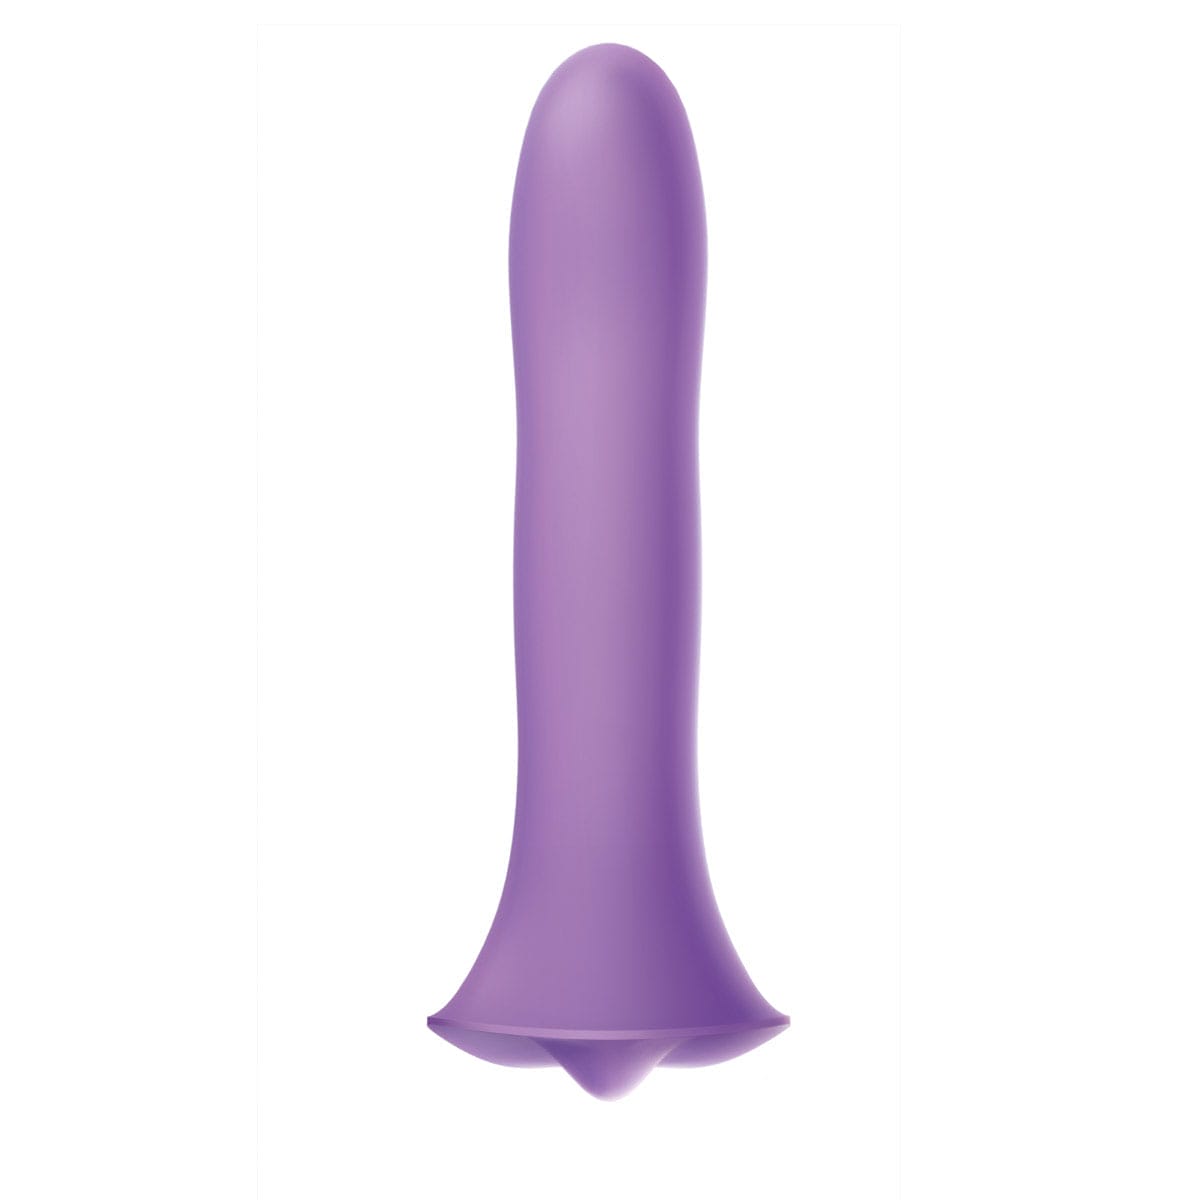 Buy Wet for Her Fusion Dil   Medium   Violet 6.93 long and 1.38 thick dildo made by Wet For Her.